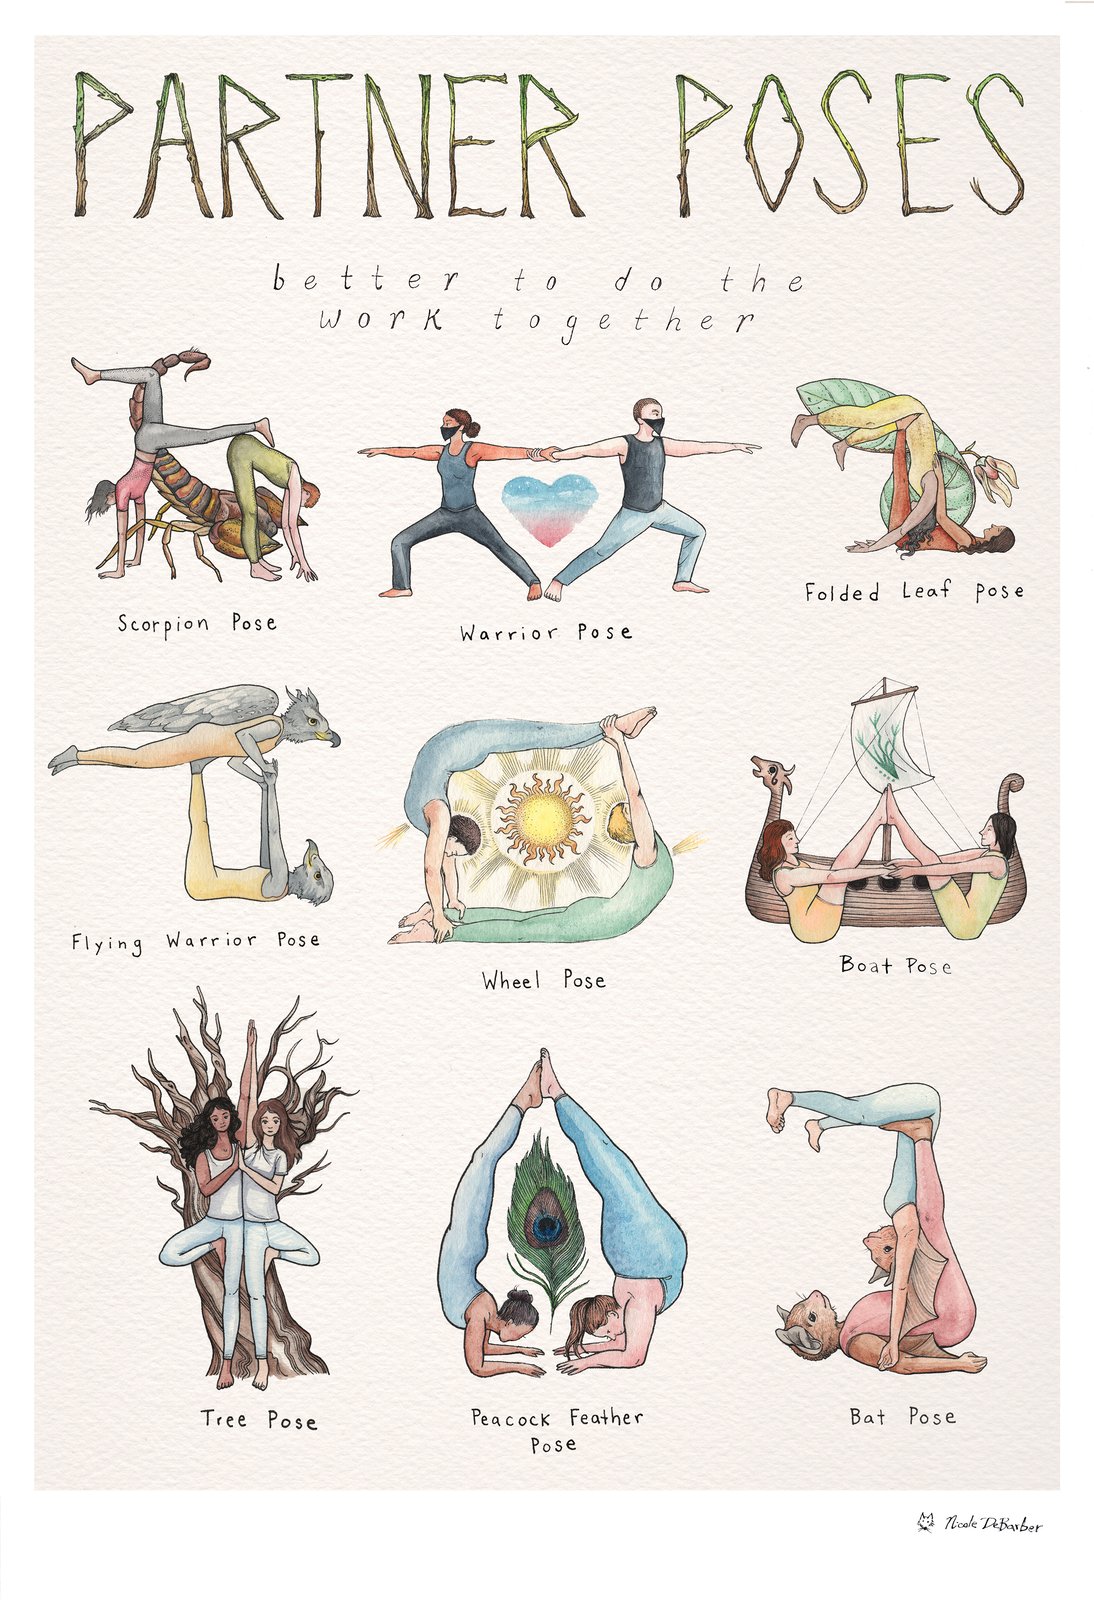 Buy Yoga Poses Poster 24x36 Large Yoga Art Print on 100% Recycled Paper  With 62 Asanas Poses in English & Sanskrit Yoga Gifts Online in India - Etsy